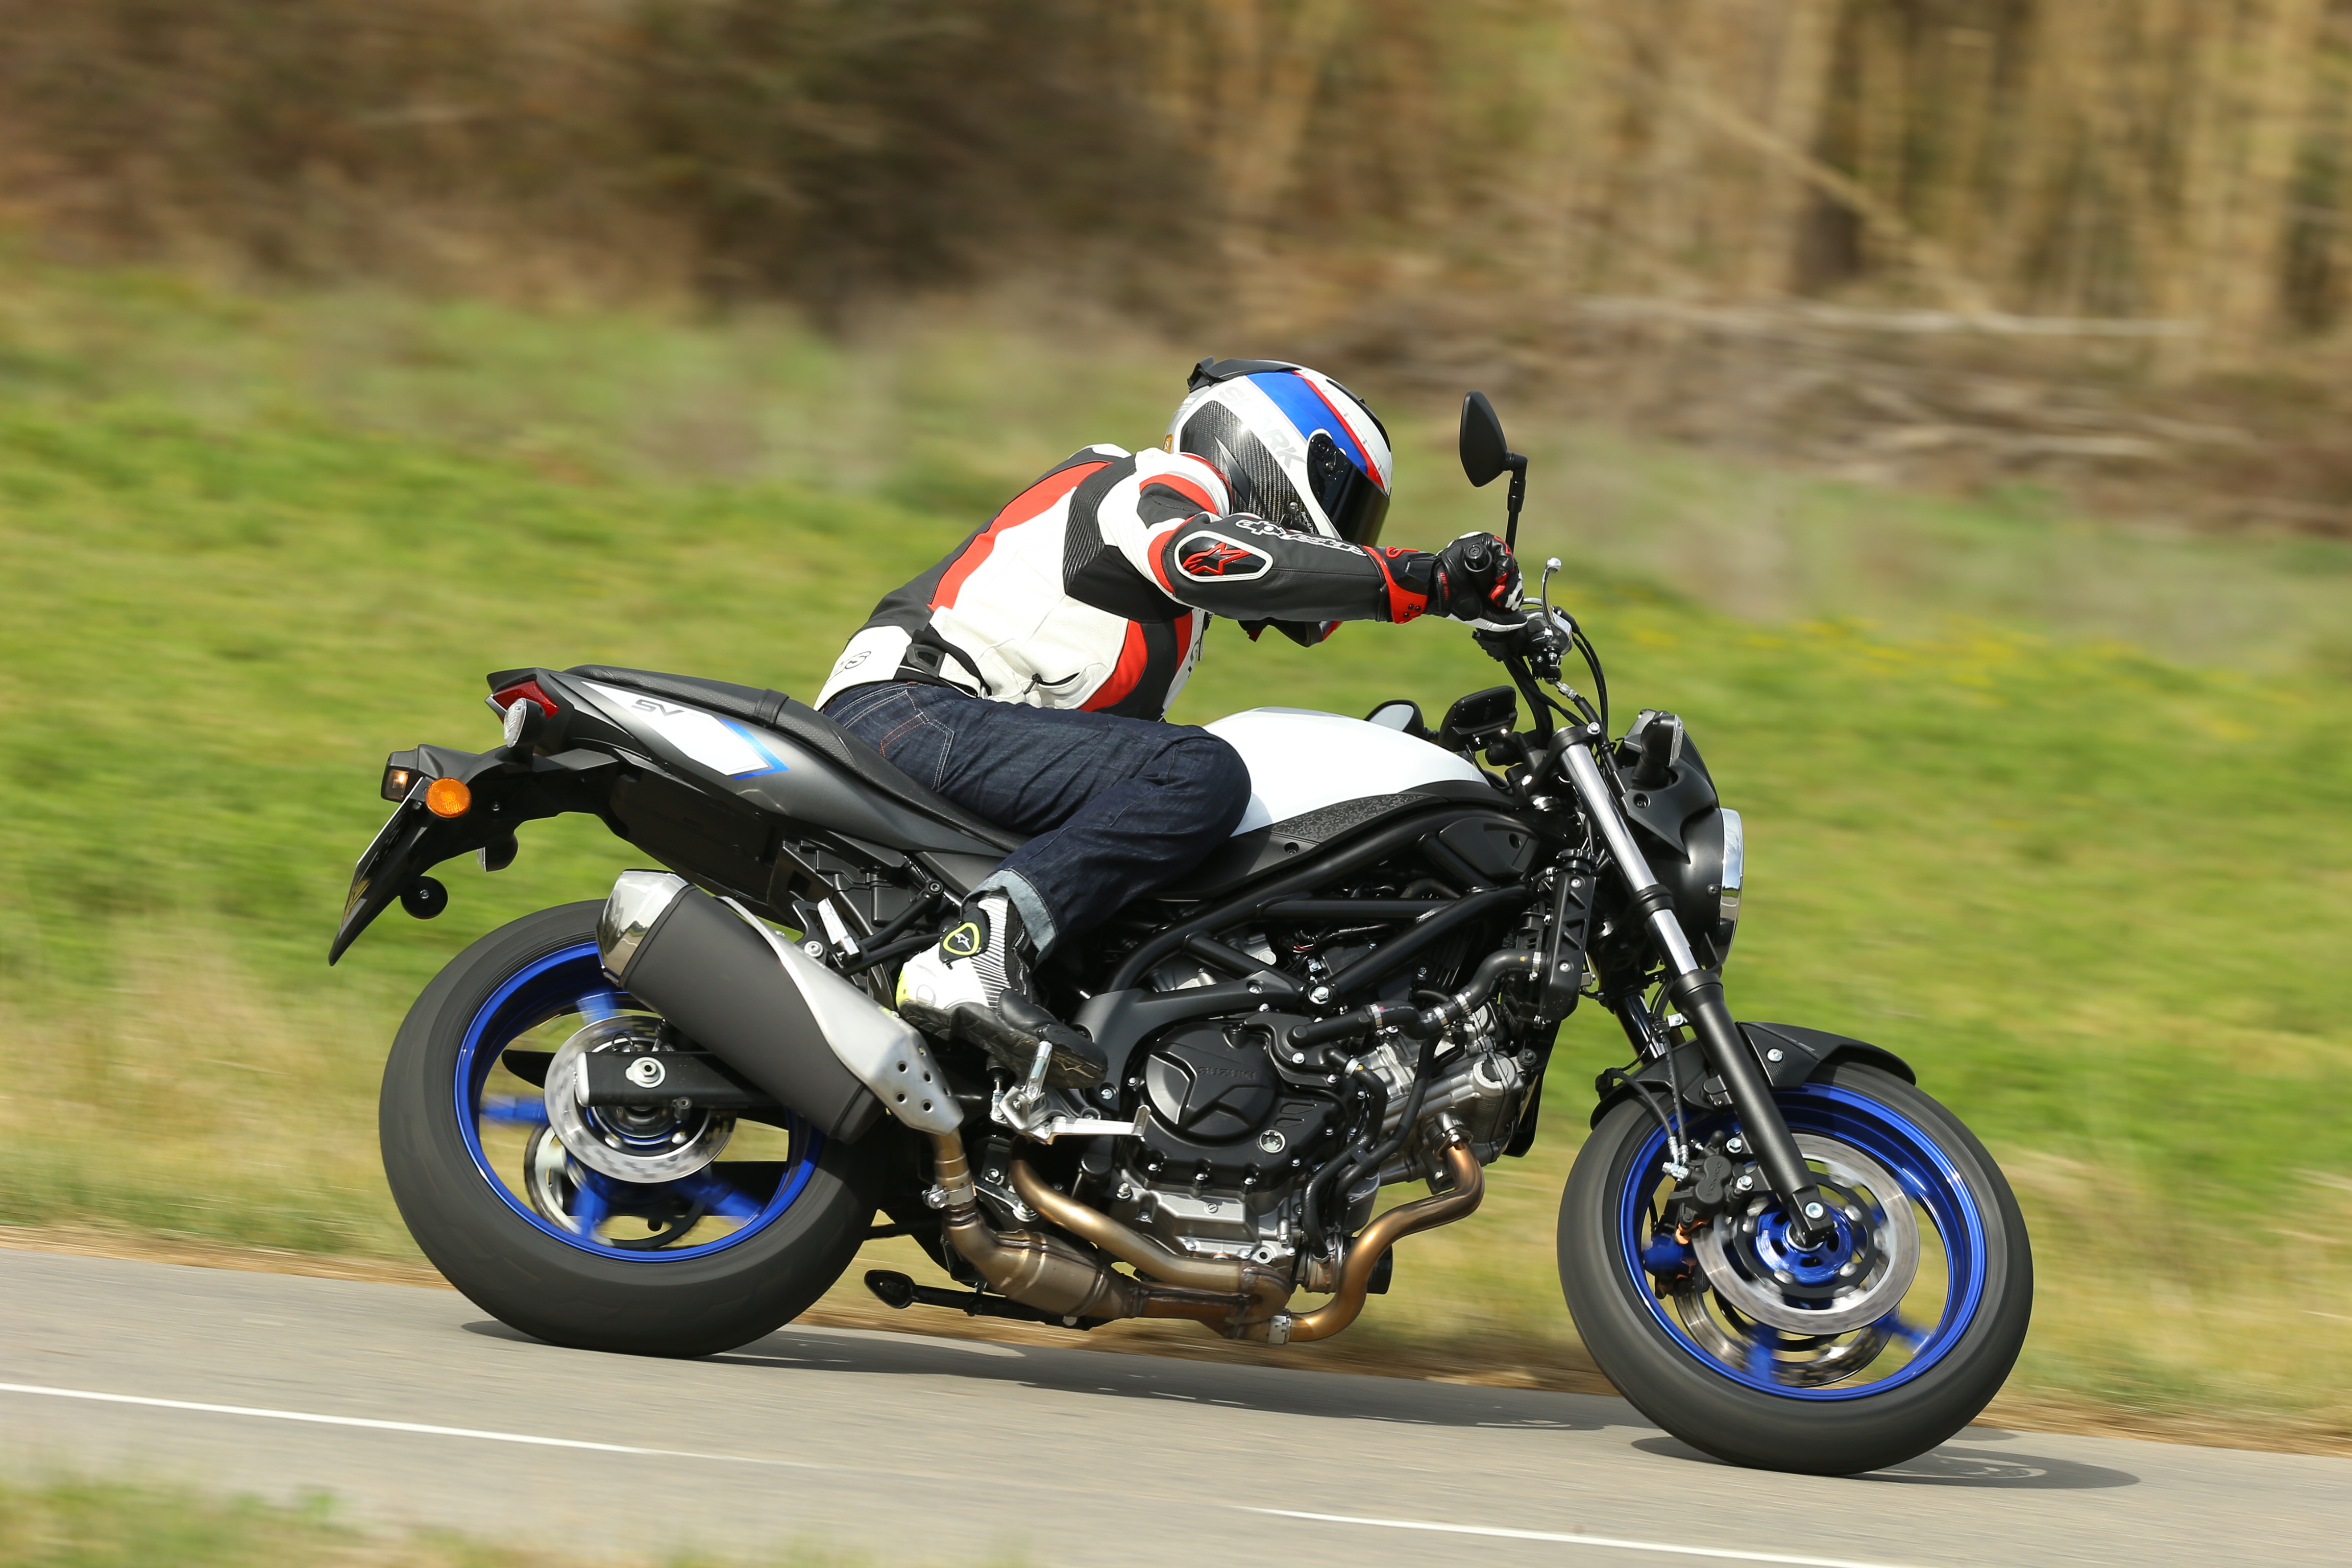 A black and white 2016 Suzuki SV650 being ridden down a country road